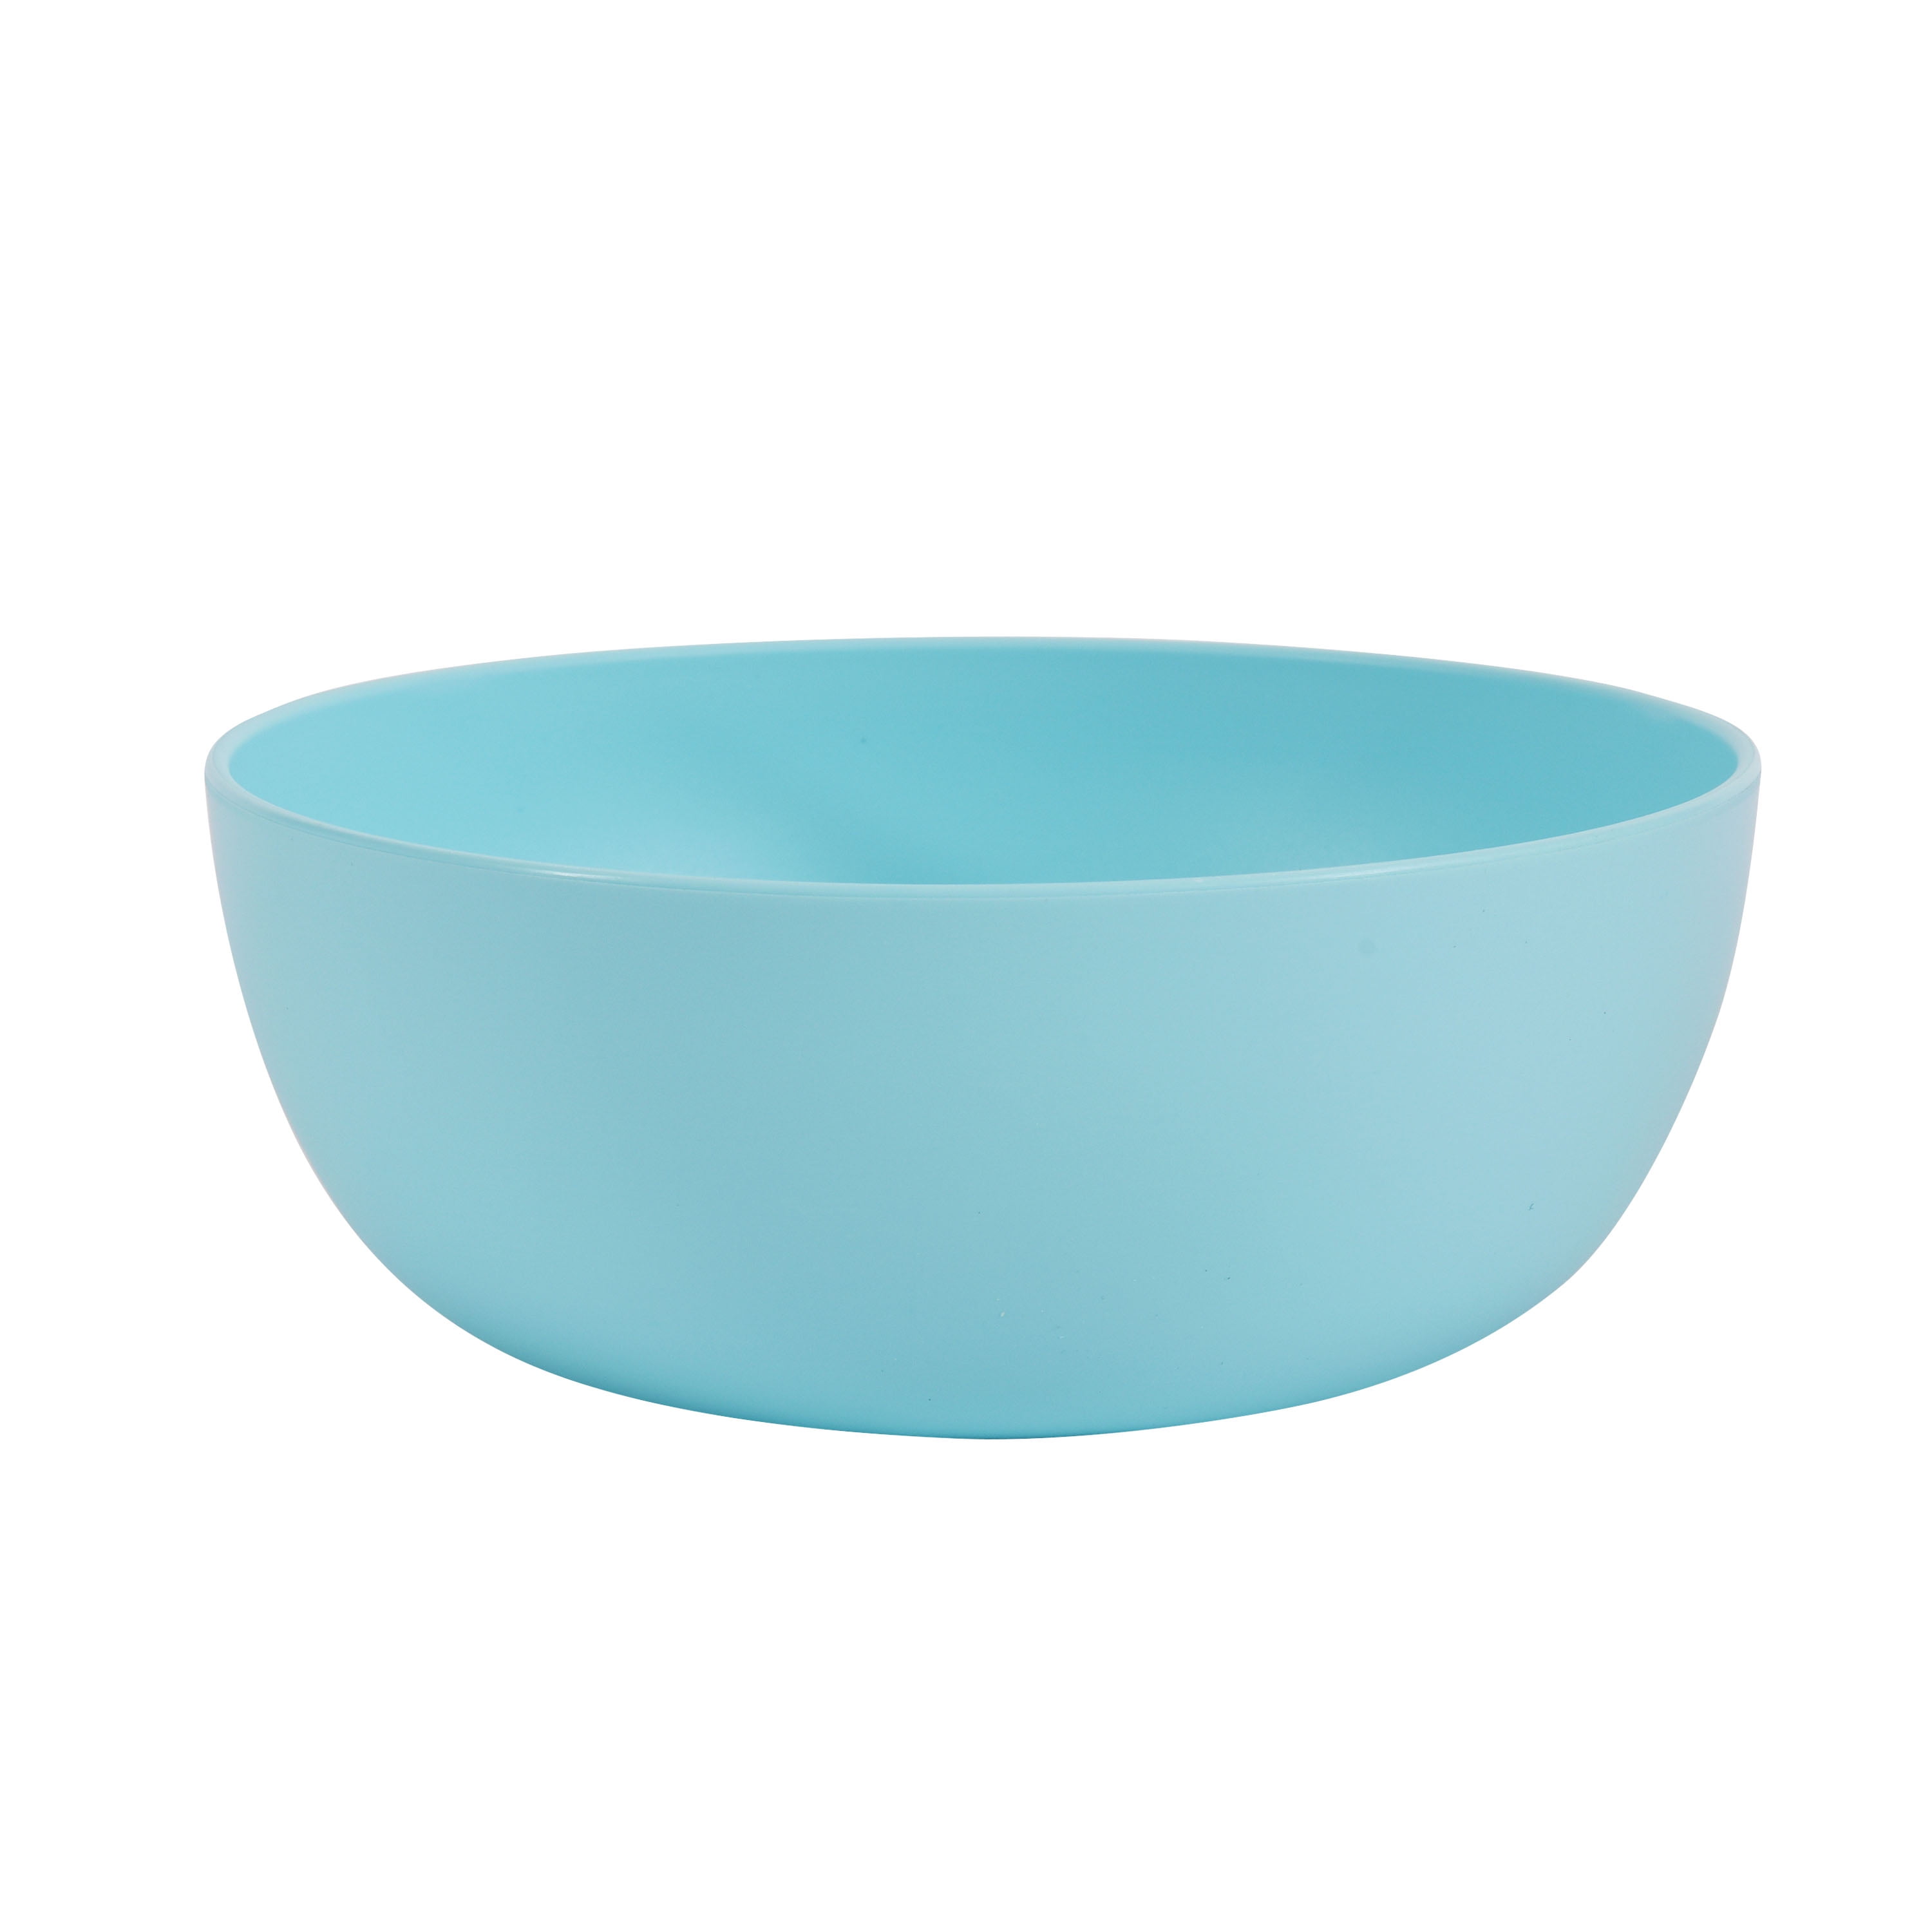 Mainstays 38-Ounce Round Plastic Cereal Bowl, Teal